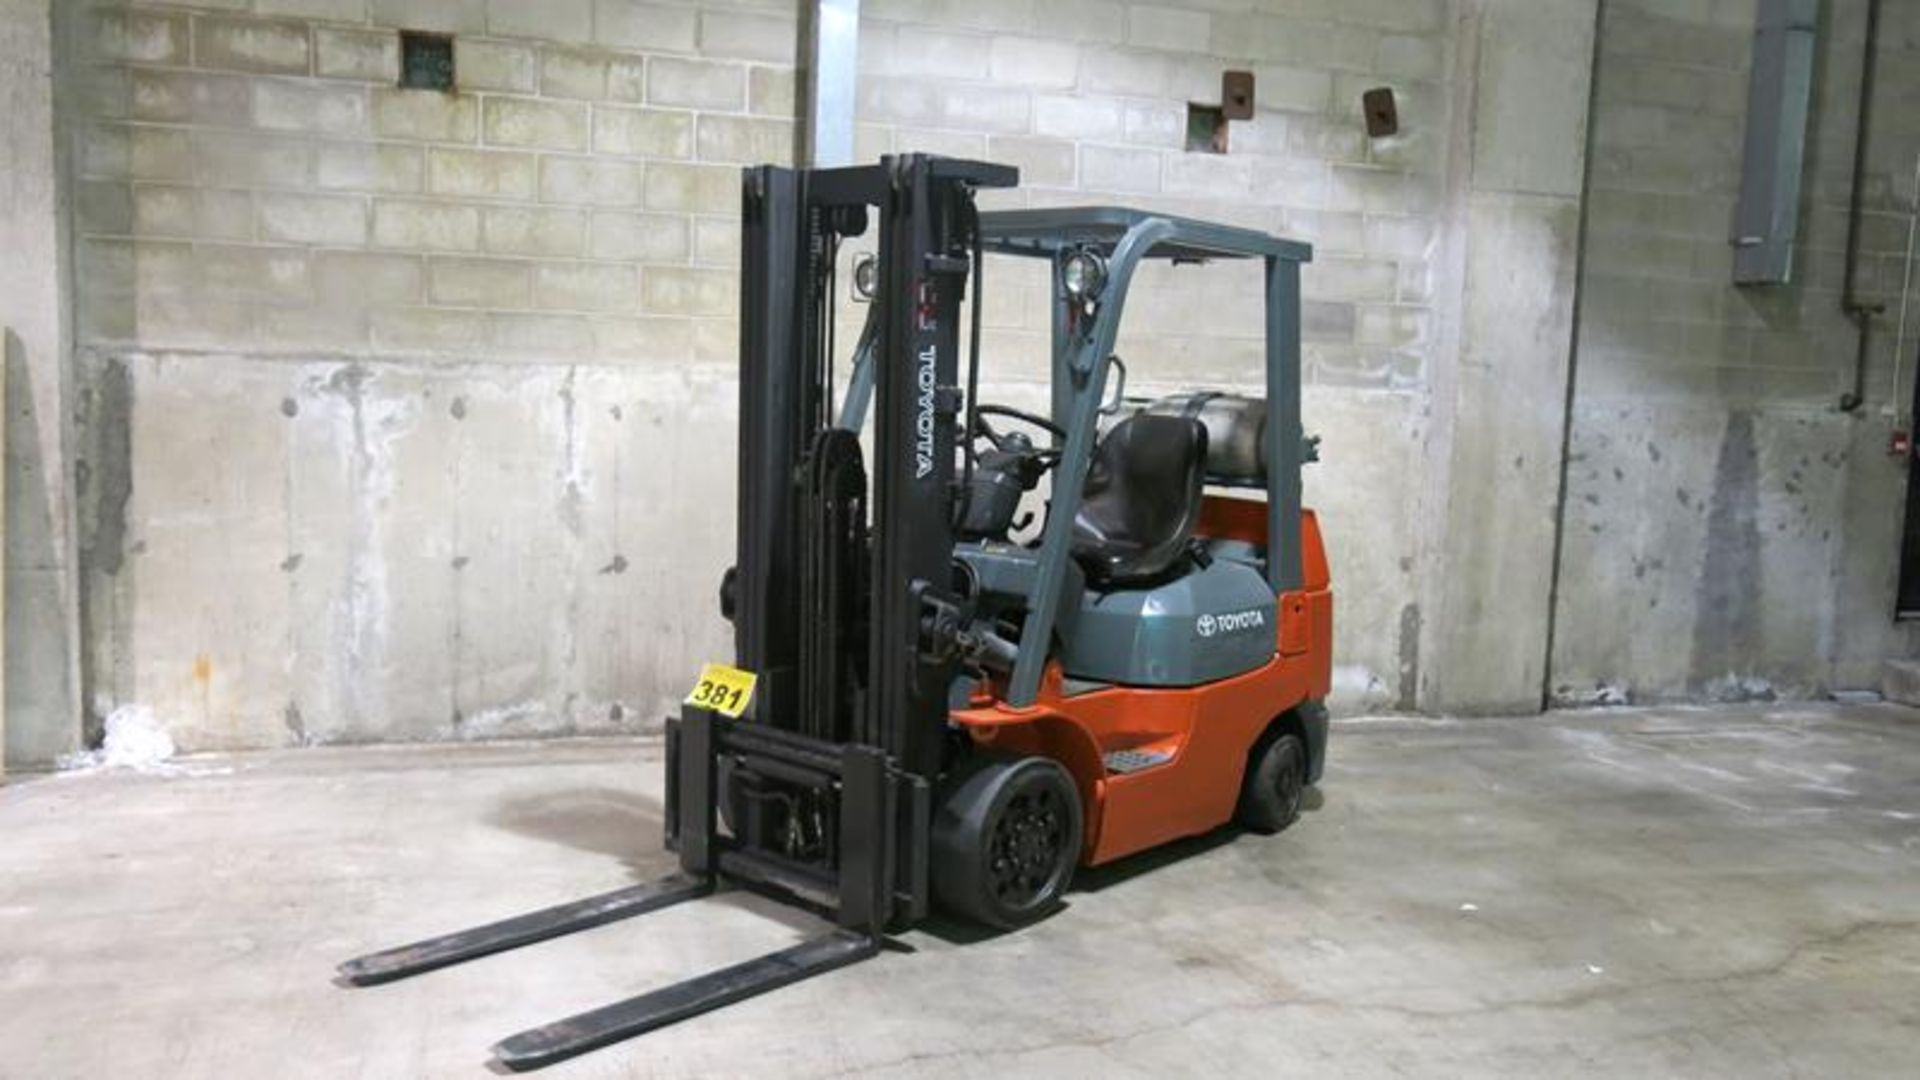 TOYOTA, 7FGCU25, 4,500 LBS, 3 STAGE, LPG FORKLIFT WITH SIDE SHIFT, 189" MAXIMUM LIFT, S/N 80139